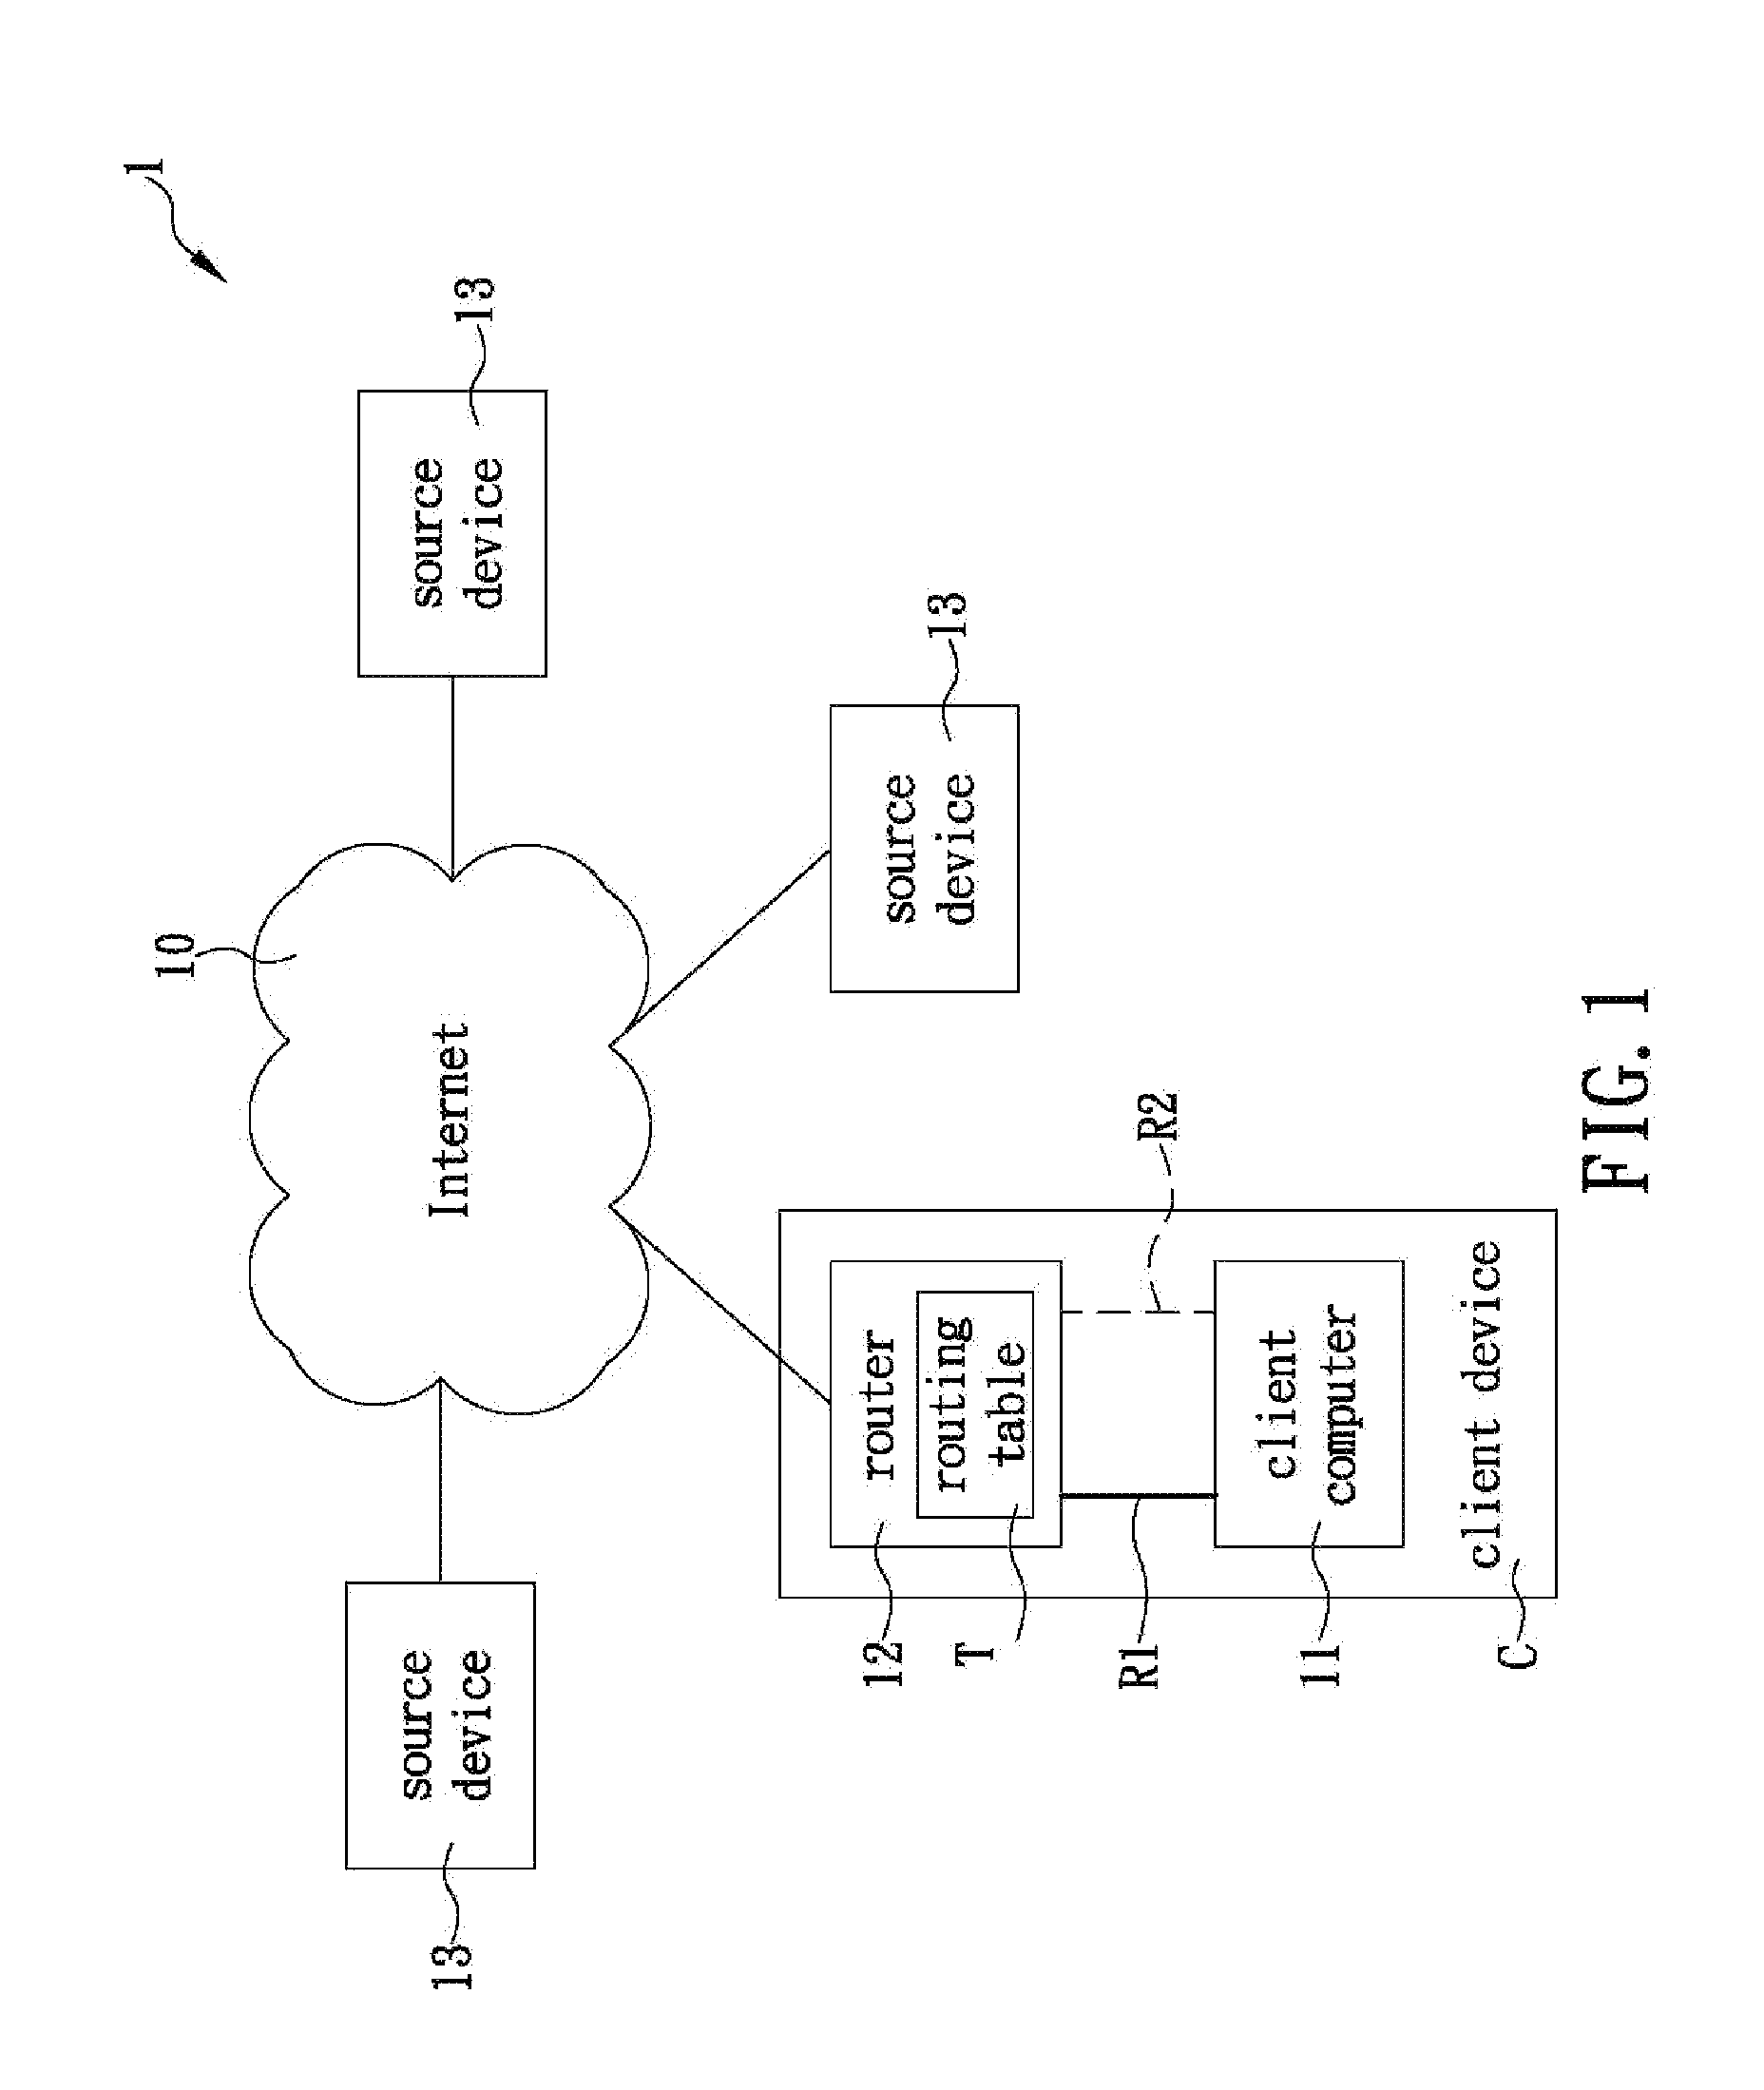 Network connection method capable of analyzing data packets in order to select connection routes